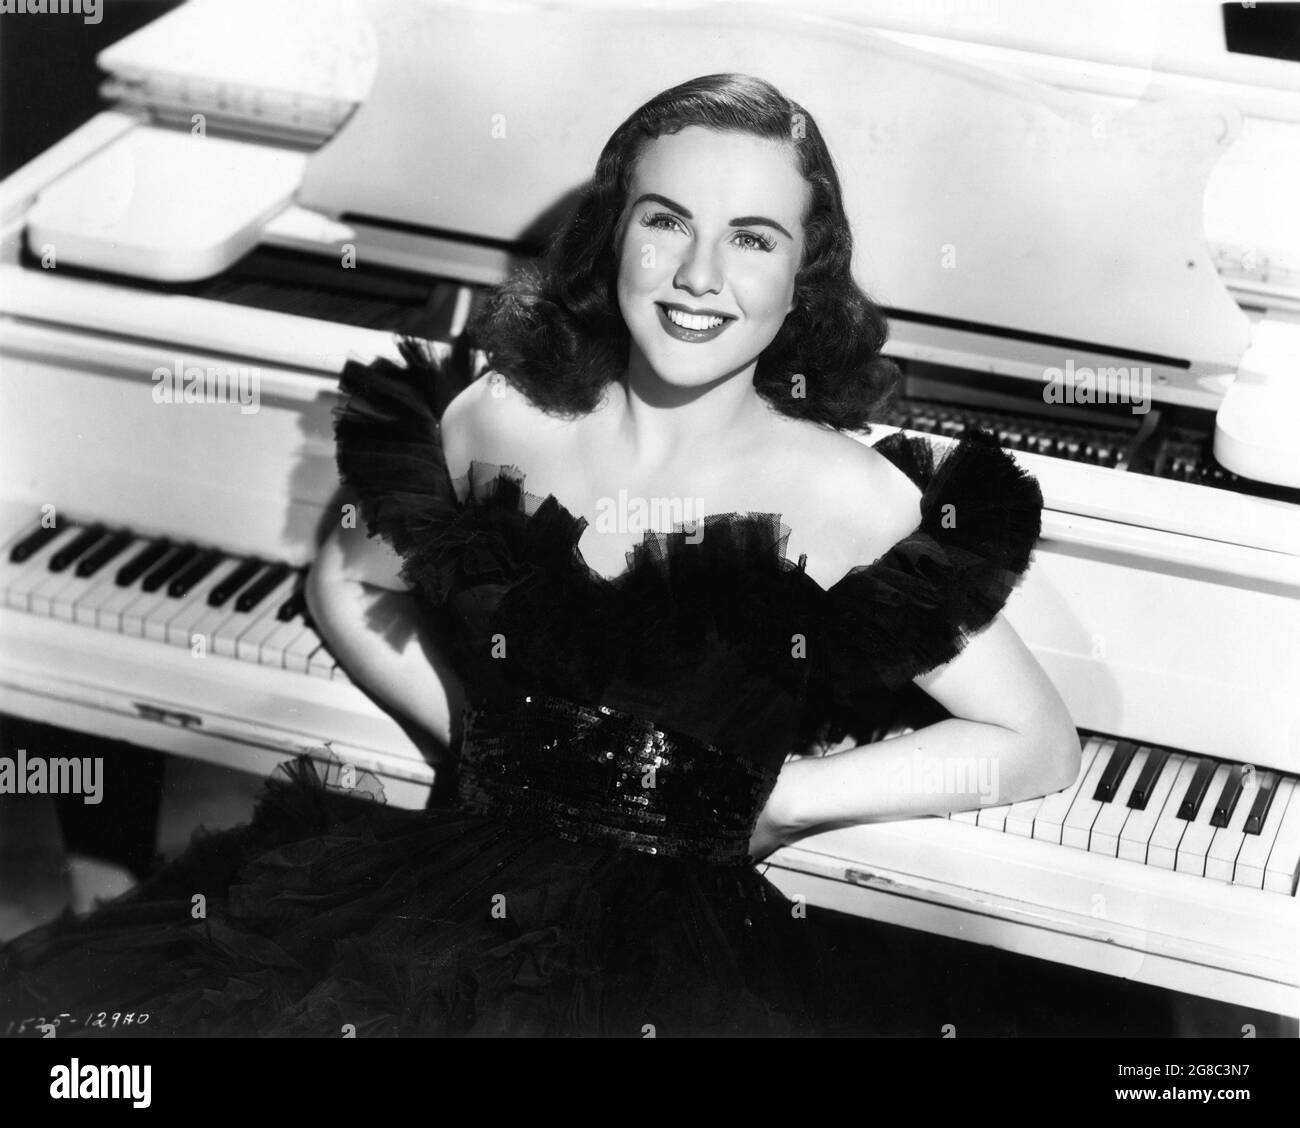 DEANNA DURBIN Publicity Portrait leaning on Piano in I'LL BE YOURS 1947 director WILLIAM A. SEITER from the screenplay The Good Fairy by Preston Sturges adapted by Felix Jackson associate producer Howard Christie producer Felix Jackson Universal-International Pictures Stock Photo